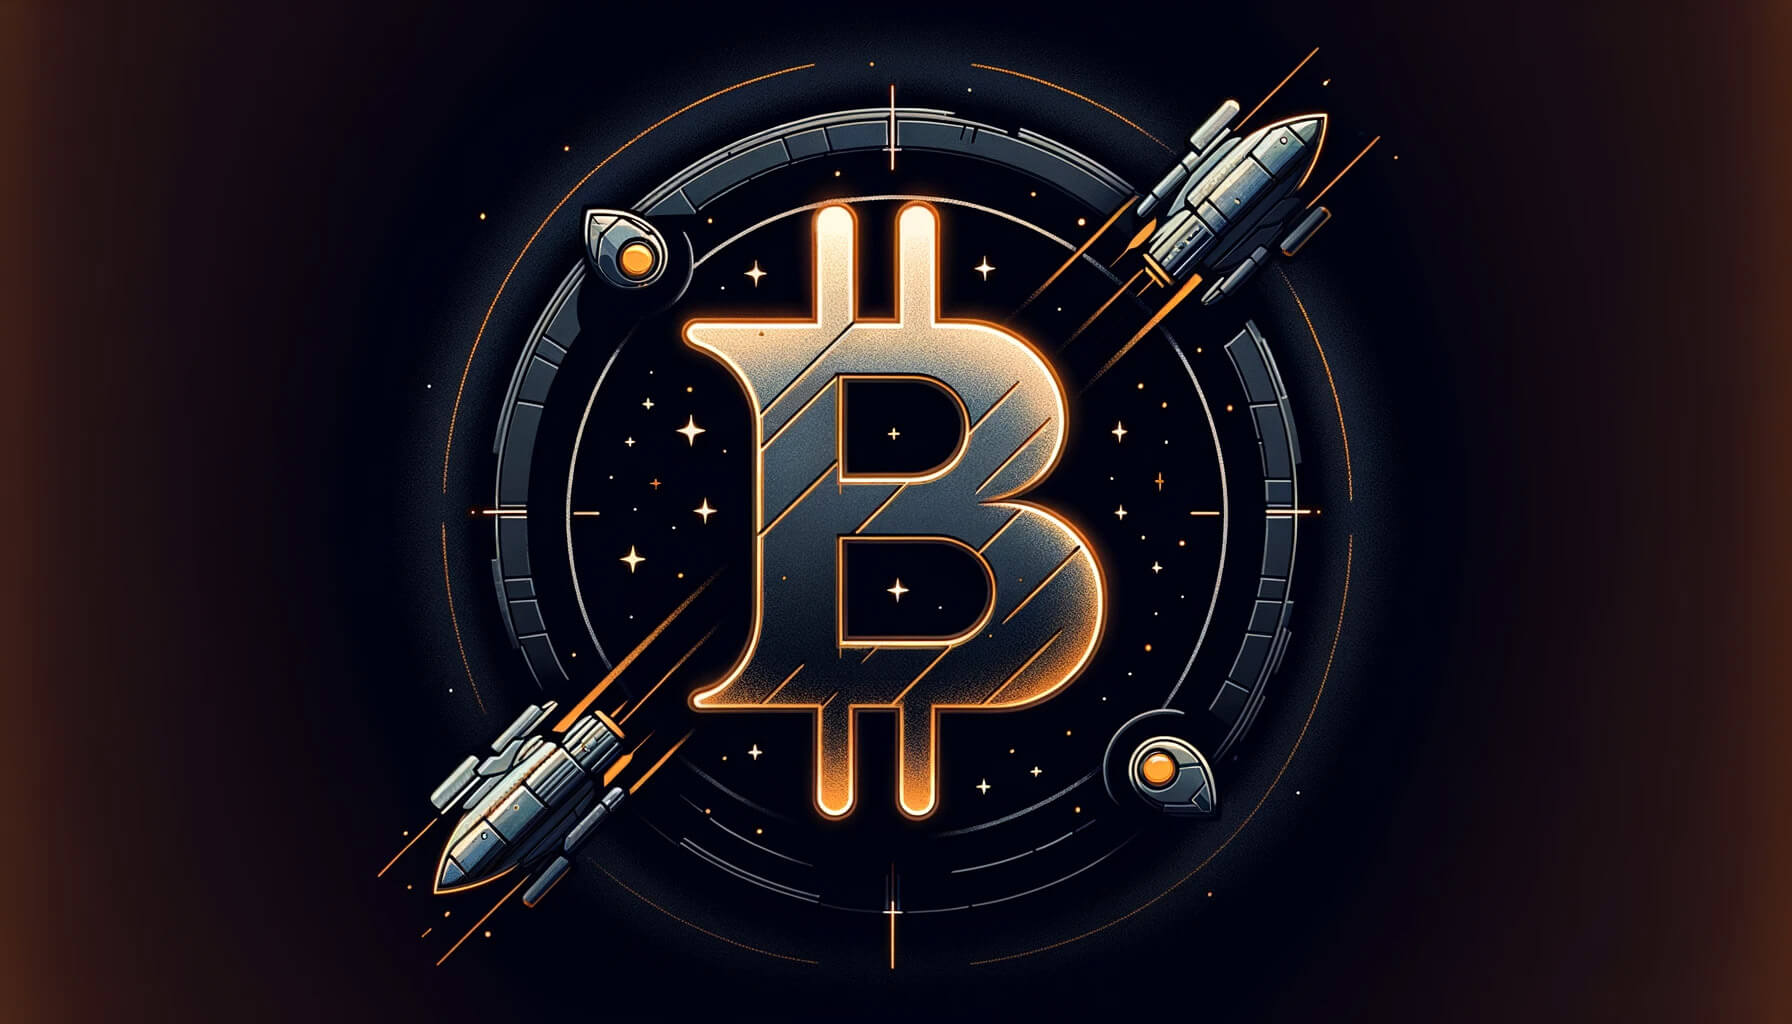  defense bitcoin space force major lowery strategy 